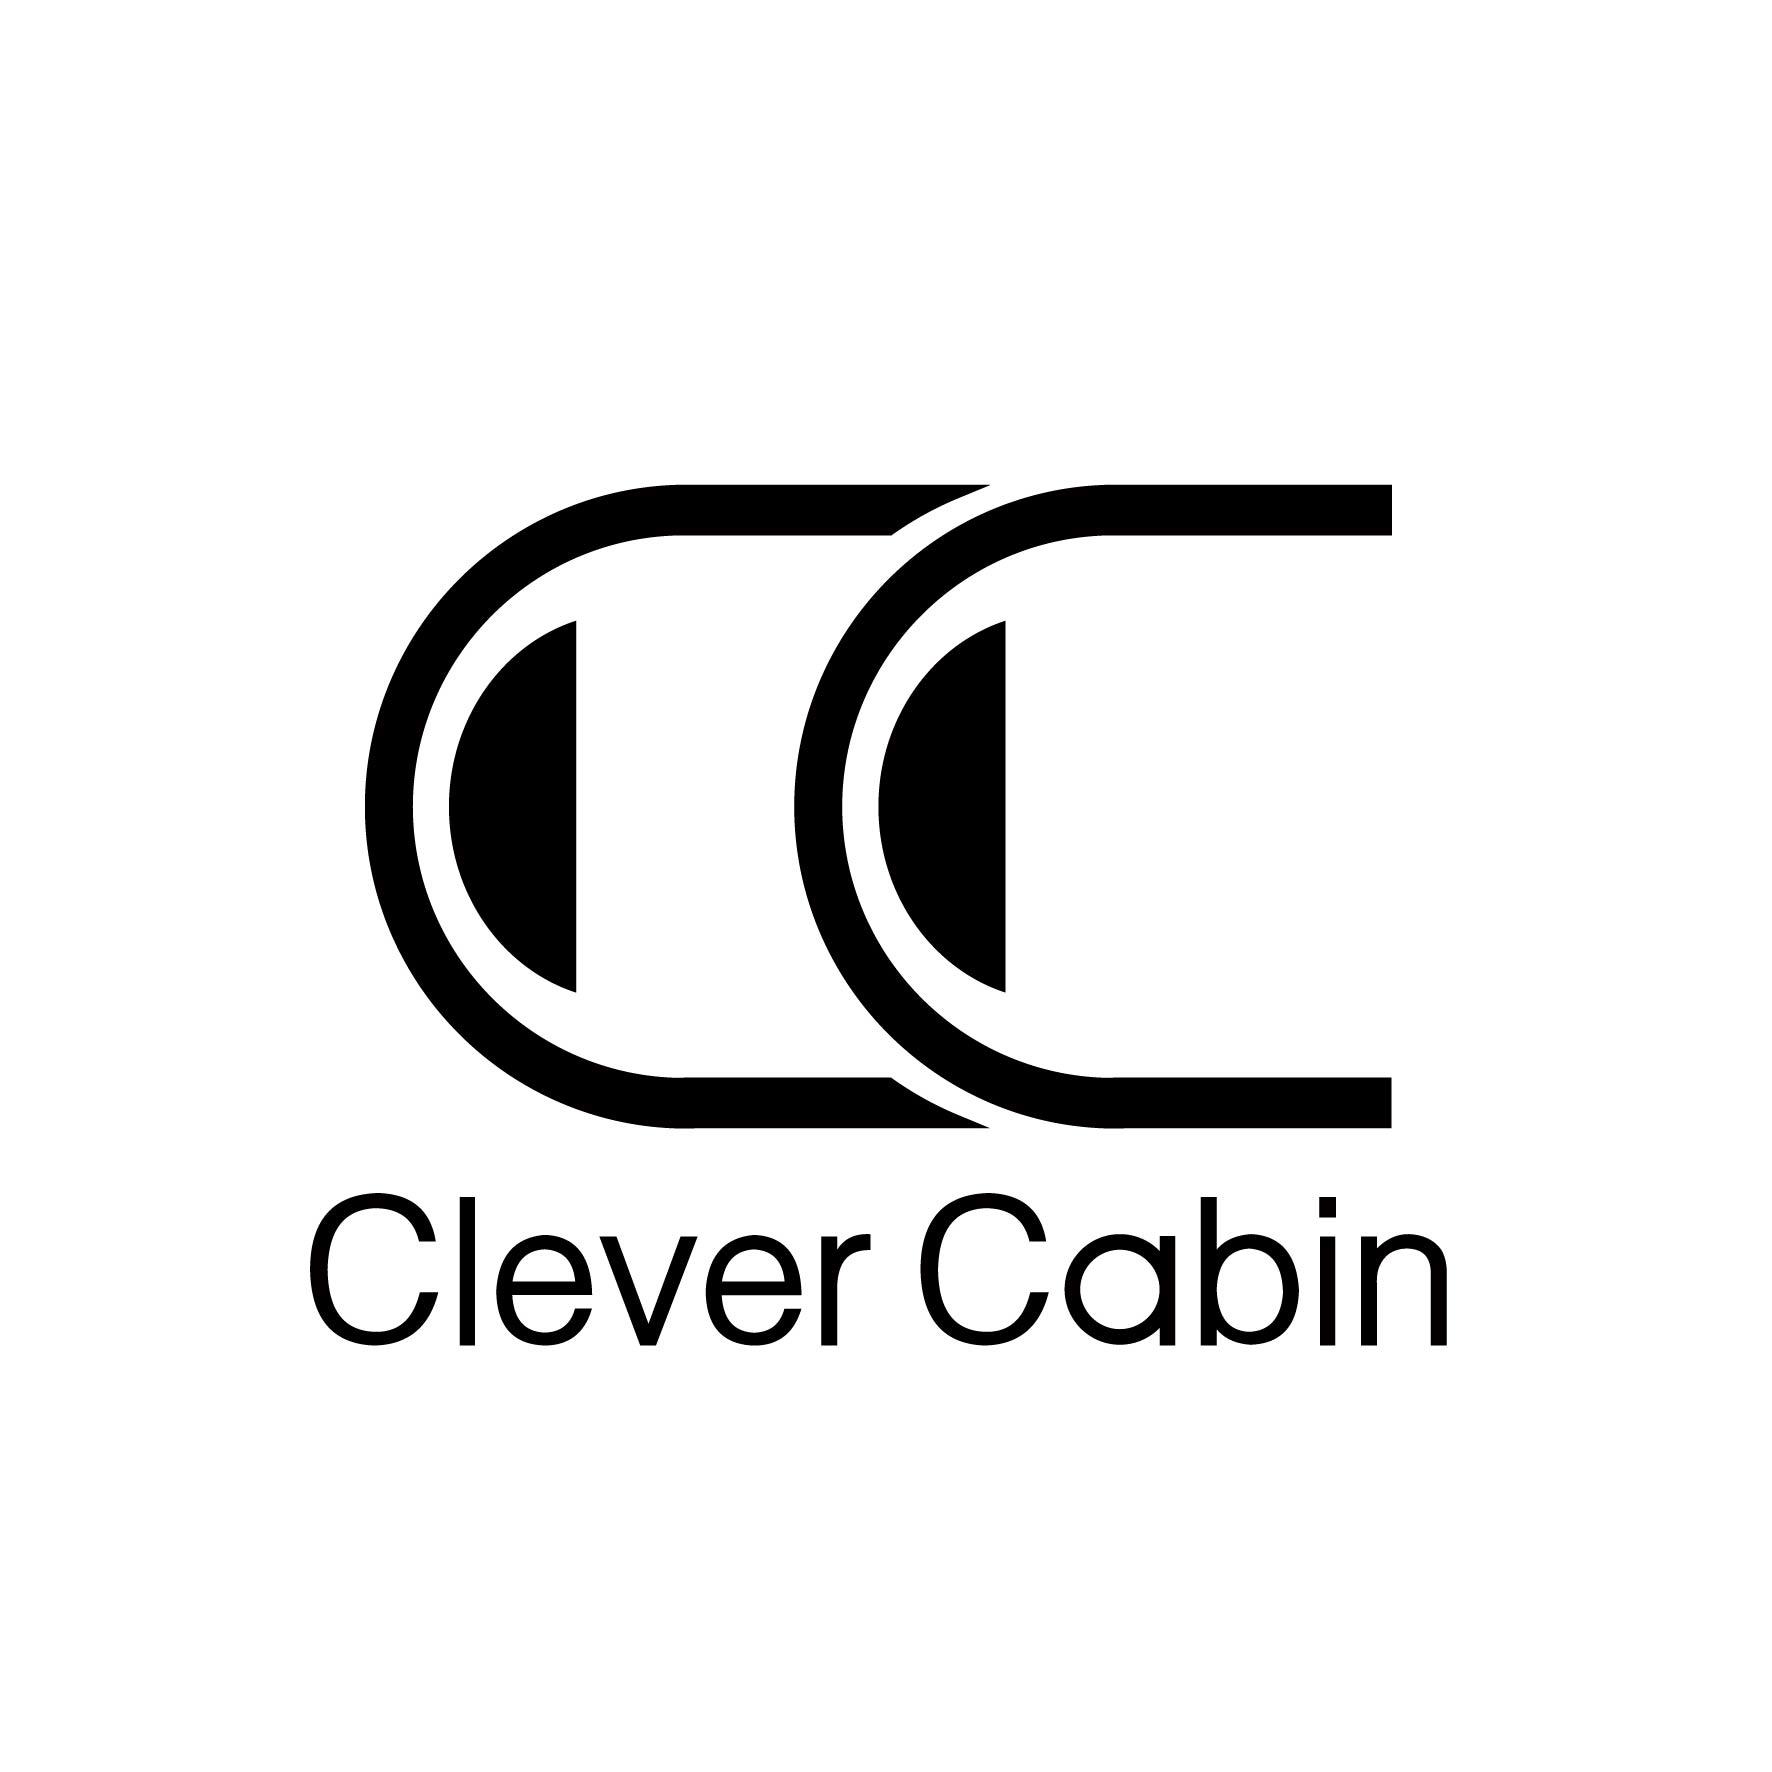 CC CLEVER CABIN